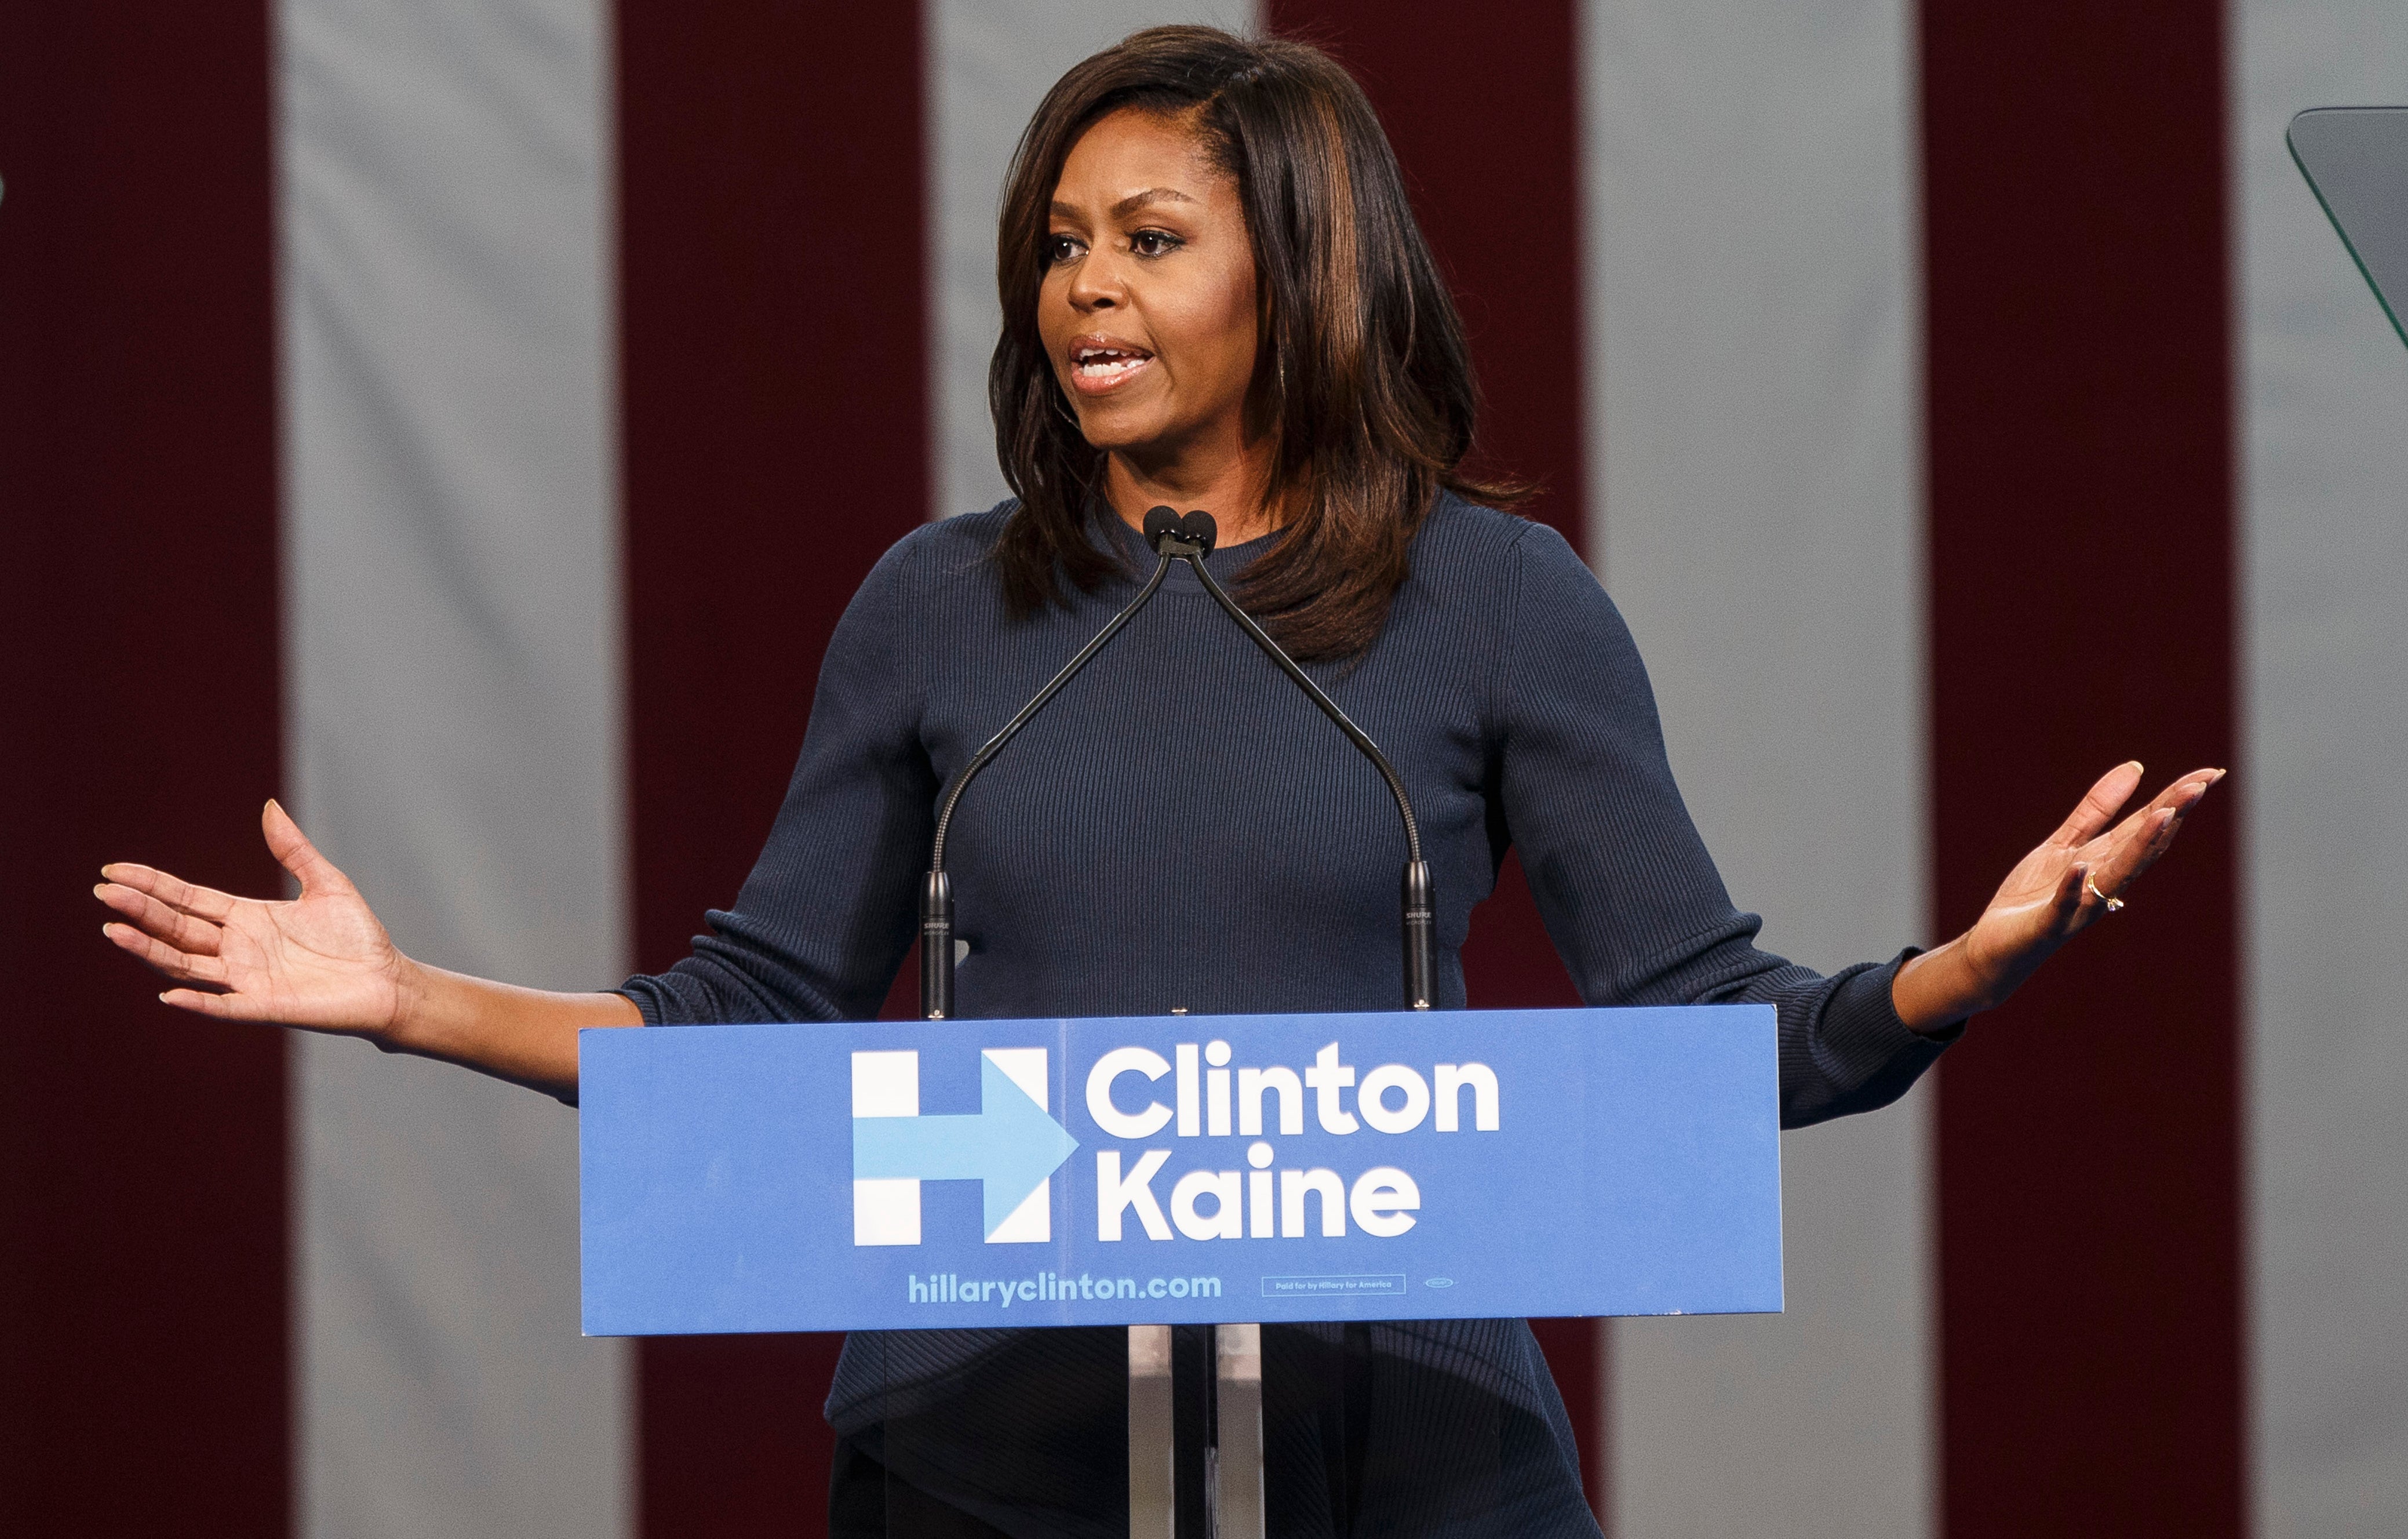 WATCH: The World Needs To Hear Michelle Obama Addressing Trump's Sexual Assault Allegations
